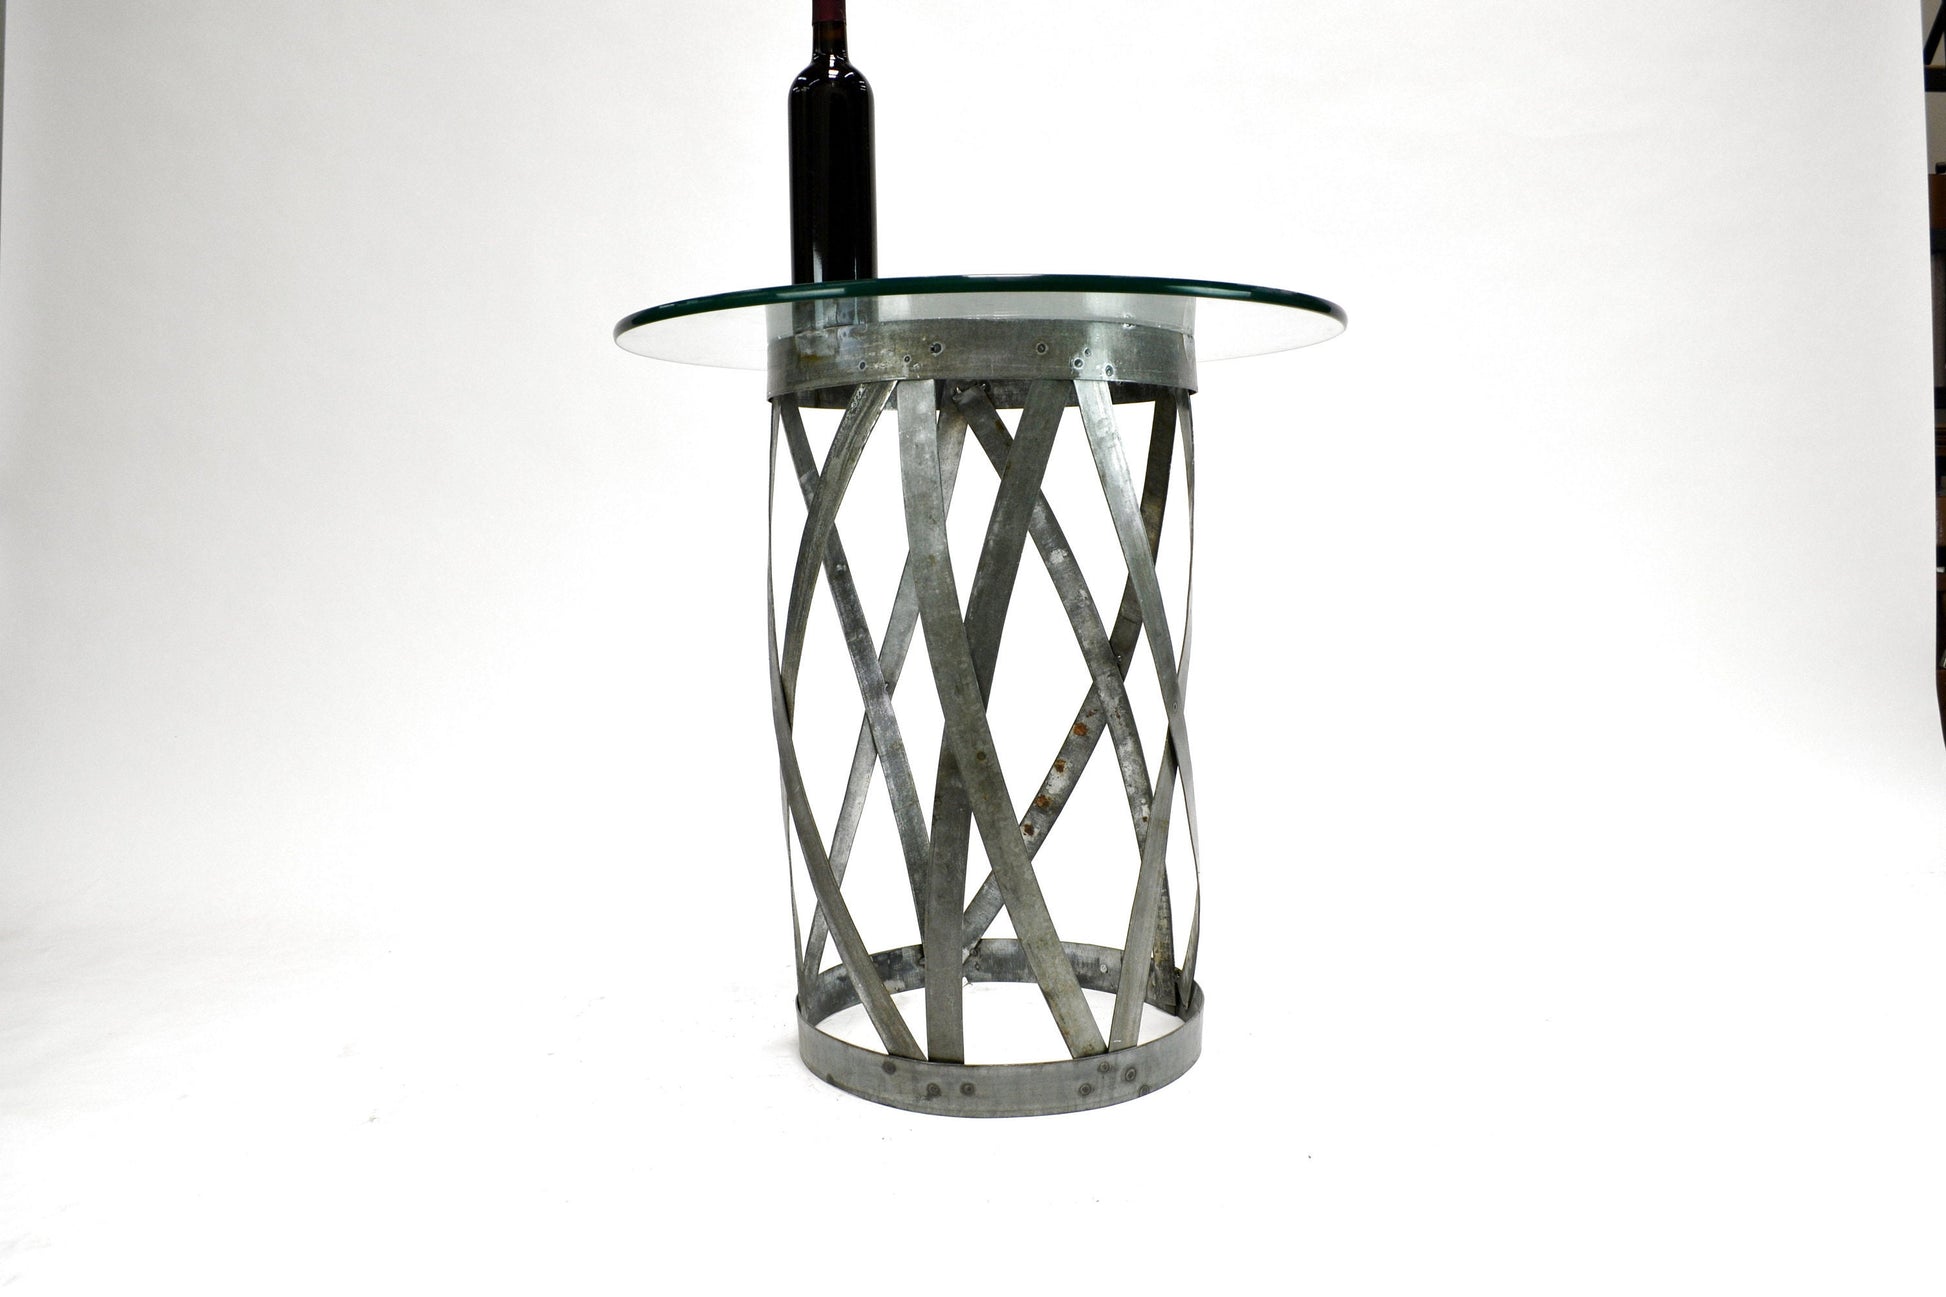 Wine Barrel Side Table - Varun - made from retired Napa wine barrel rings. 100% Recycled!